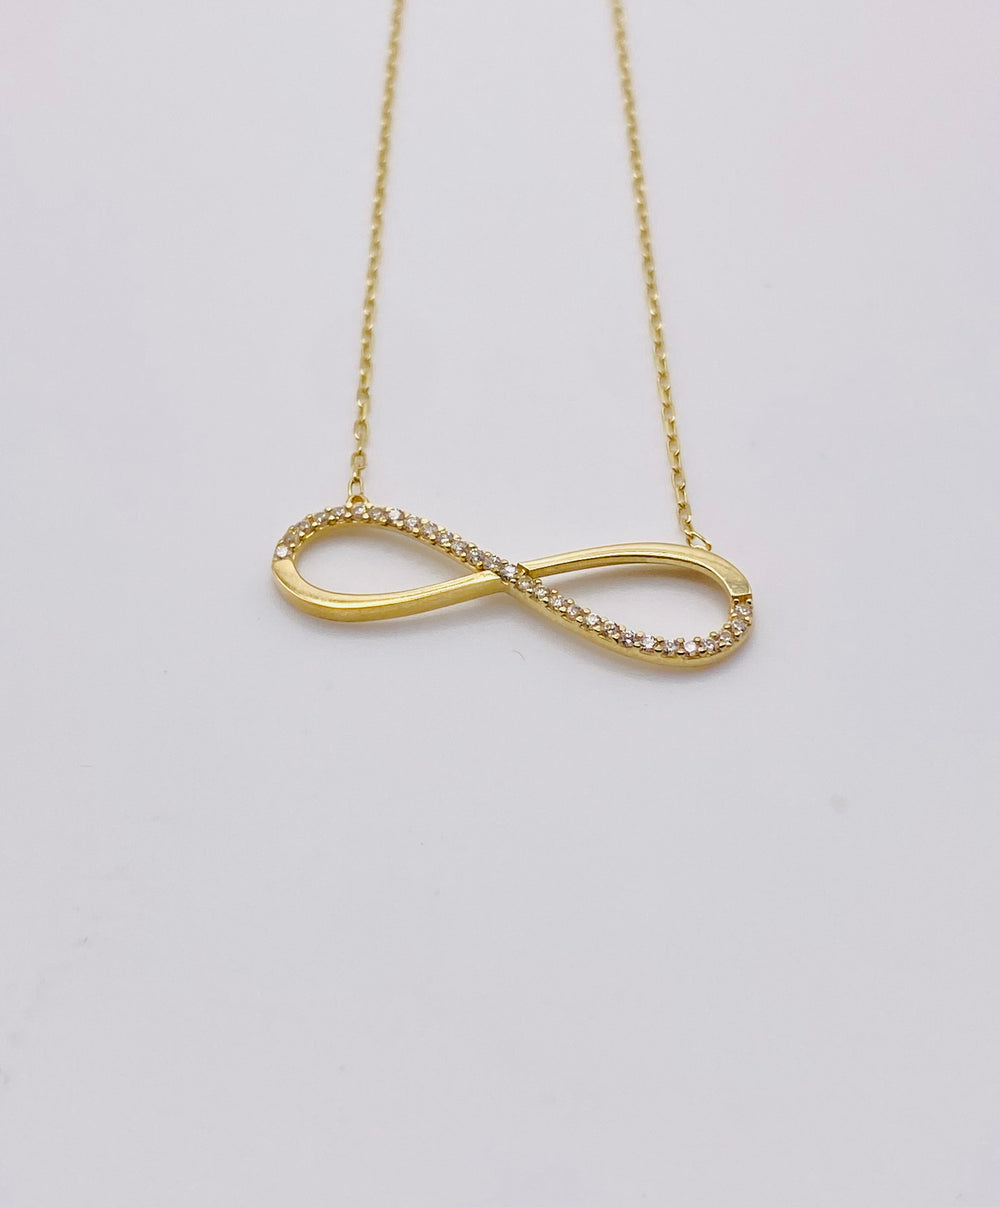 Real 10KT Gold Chain & ‘Infinite’ Charm with Cubic Zirconia Stones